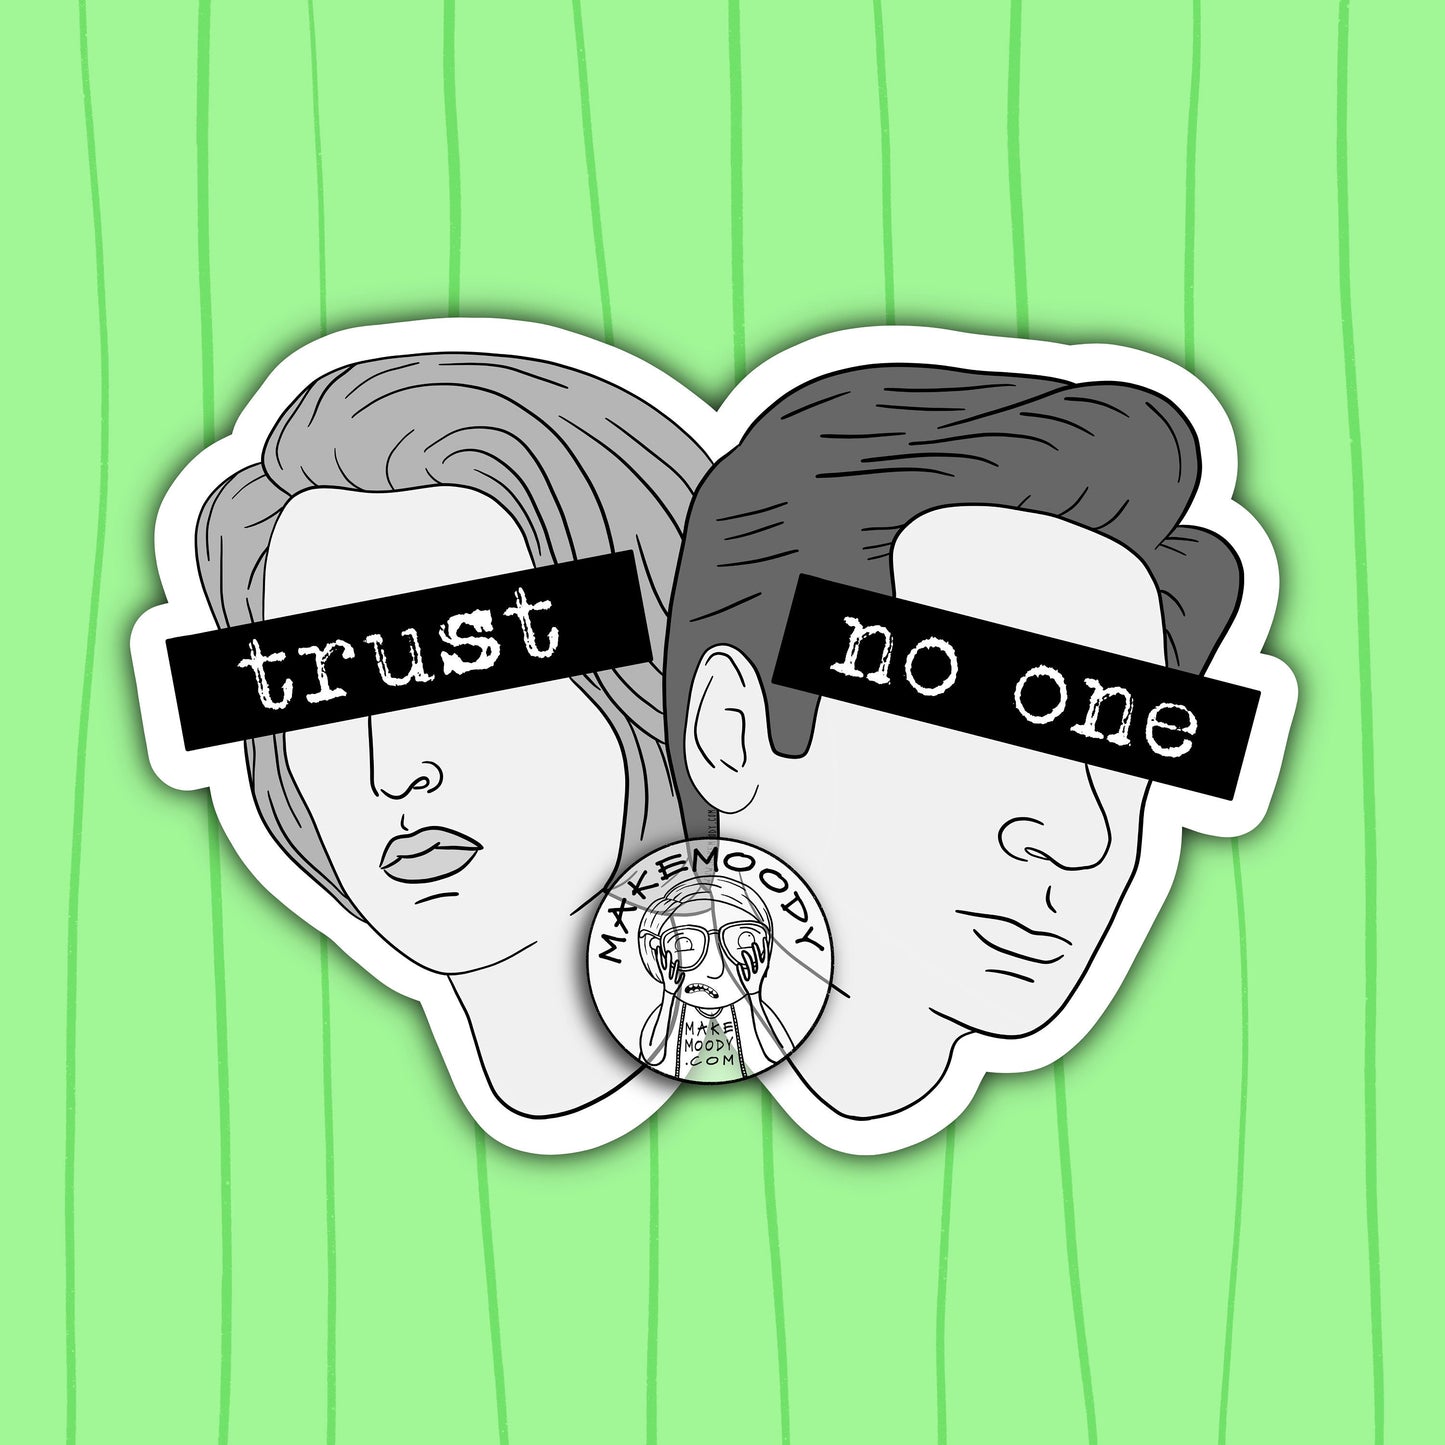 XFiles Trust No One ART PRINT - Wall Art - Mulder Art Print, Scully Art print, The Truth is Out There Art Print, Mulder & Scully, XFiles Art